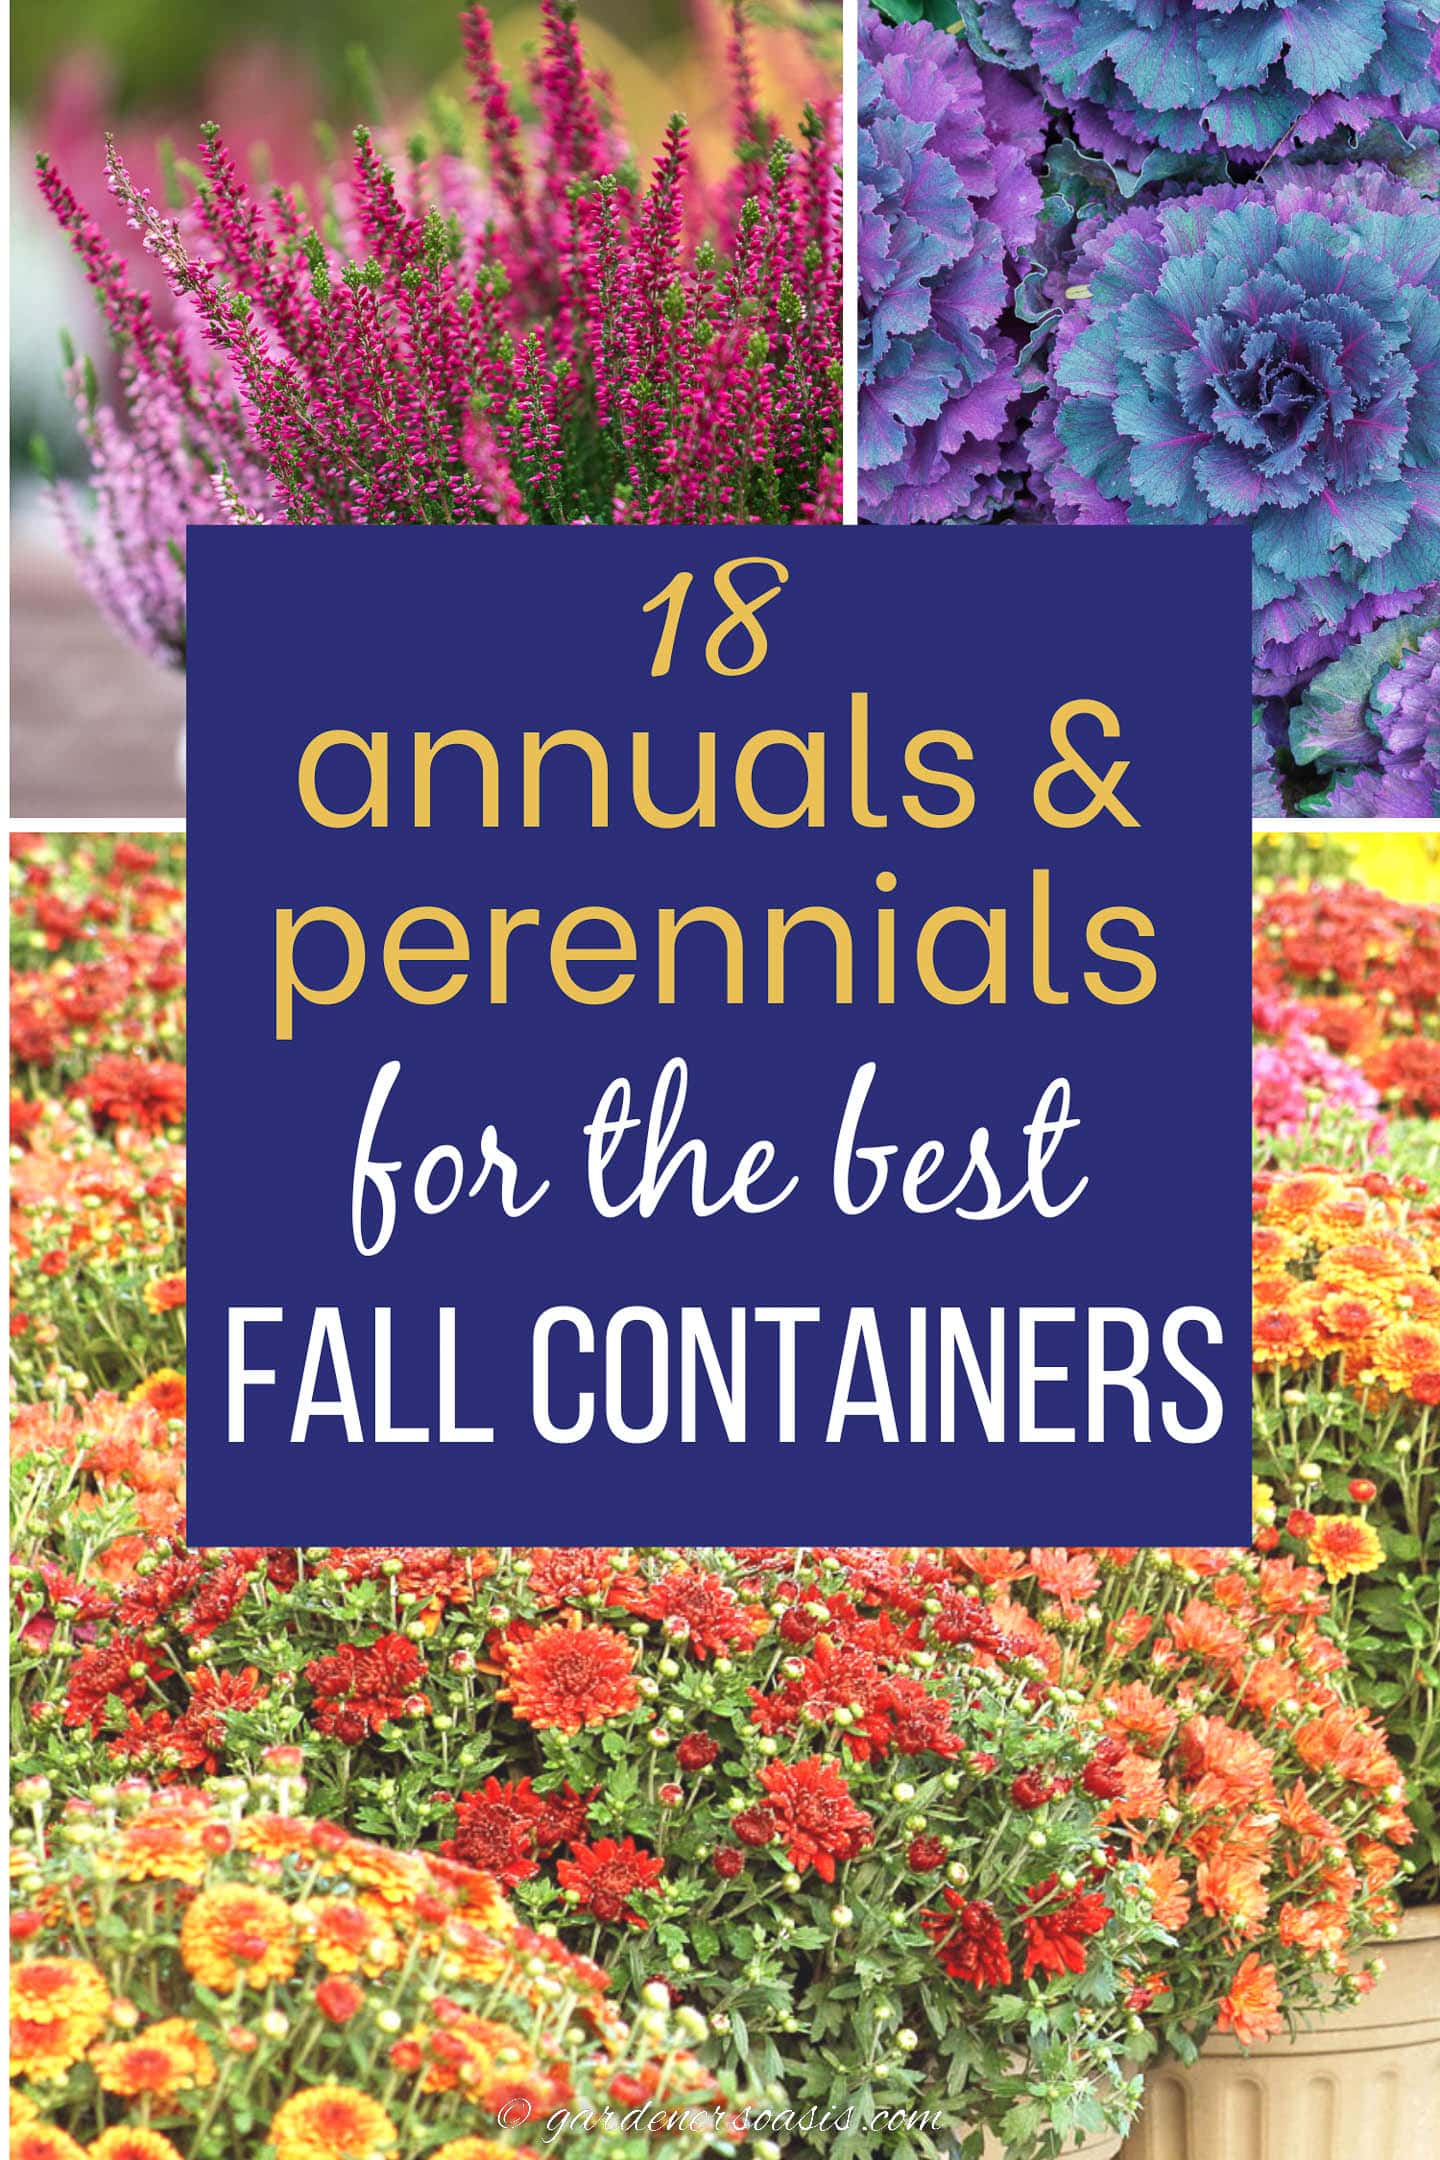 Fall container plants: 18 annuals and perennials